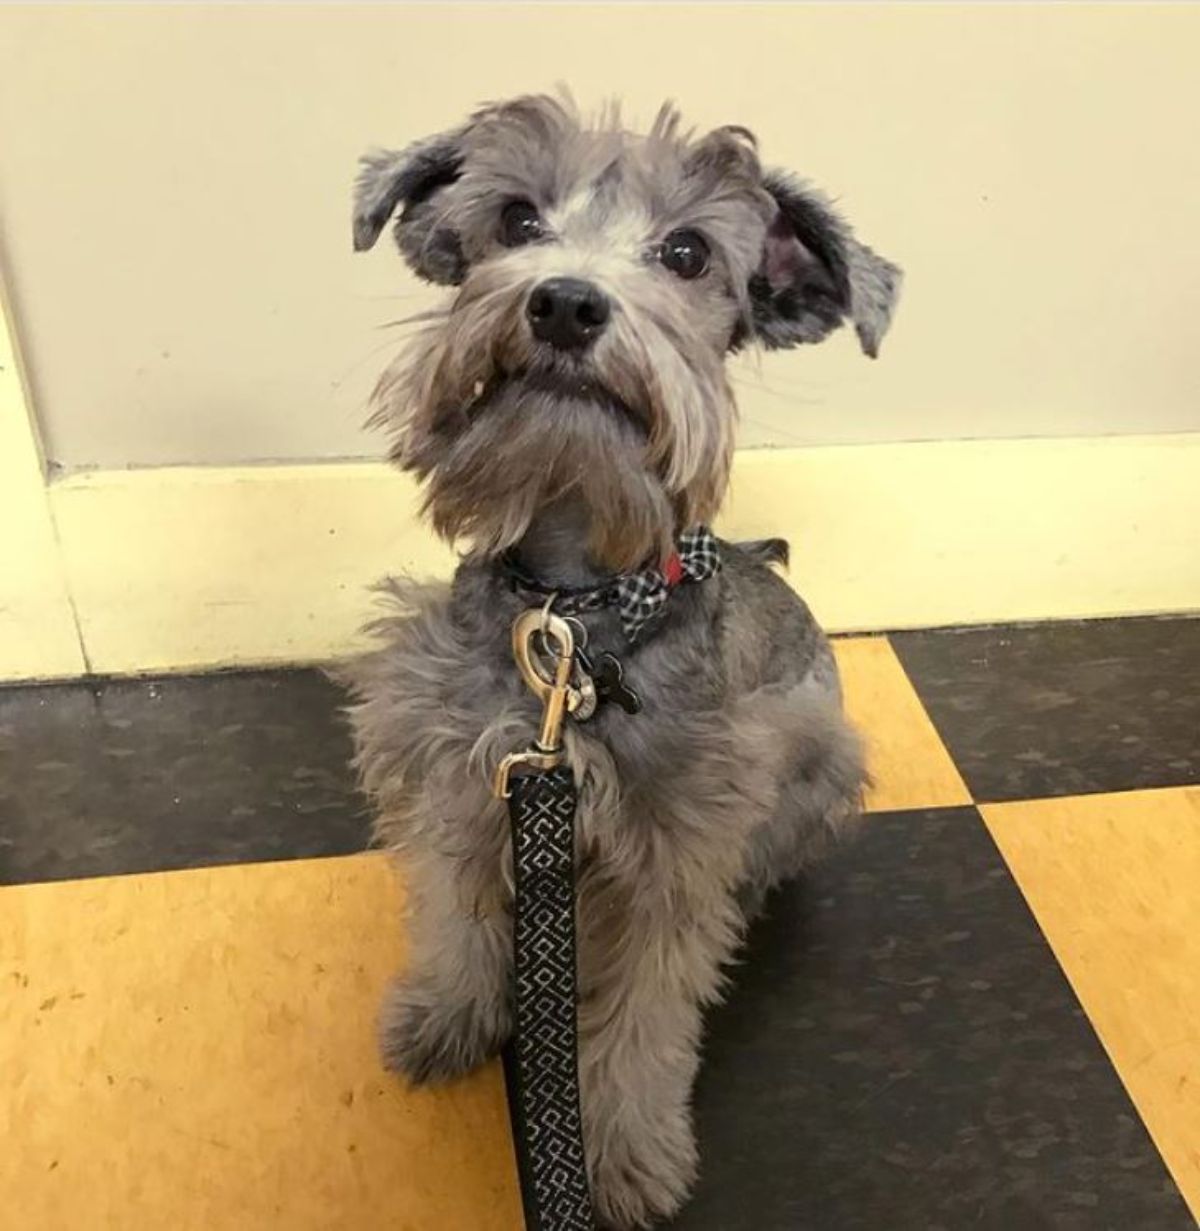 smiling Schnauzerdoodle while sitting on the floor